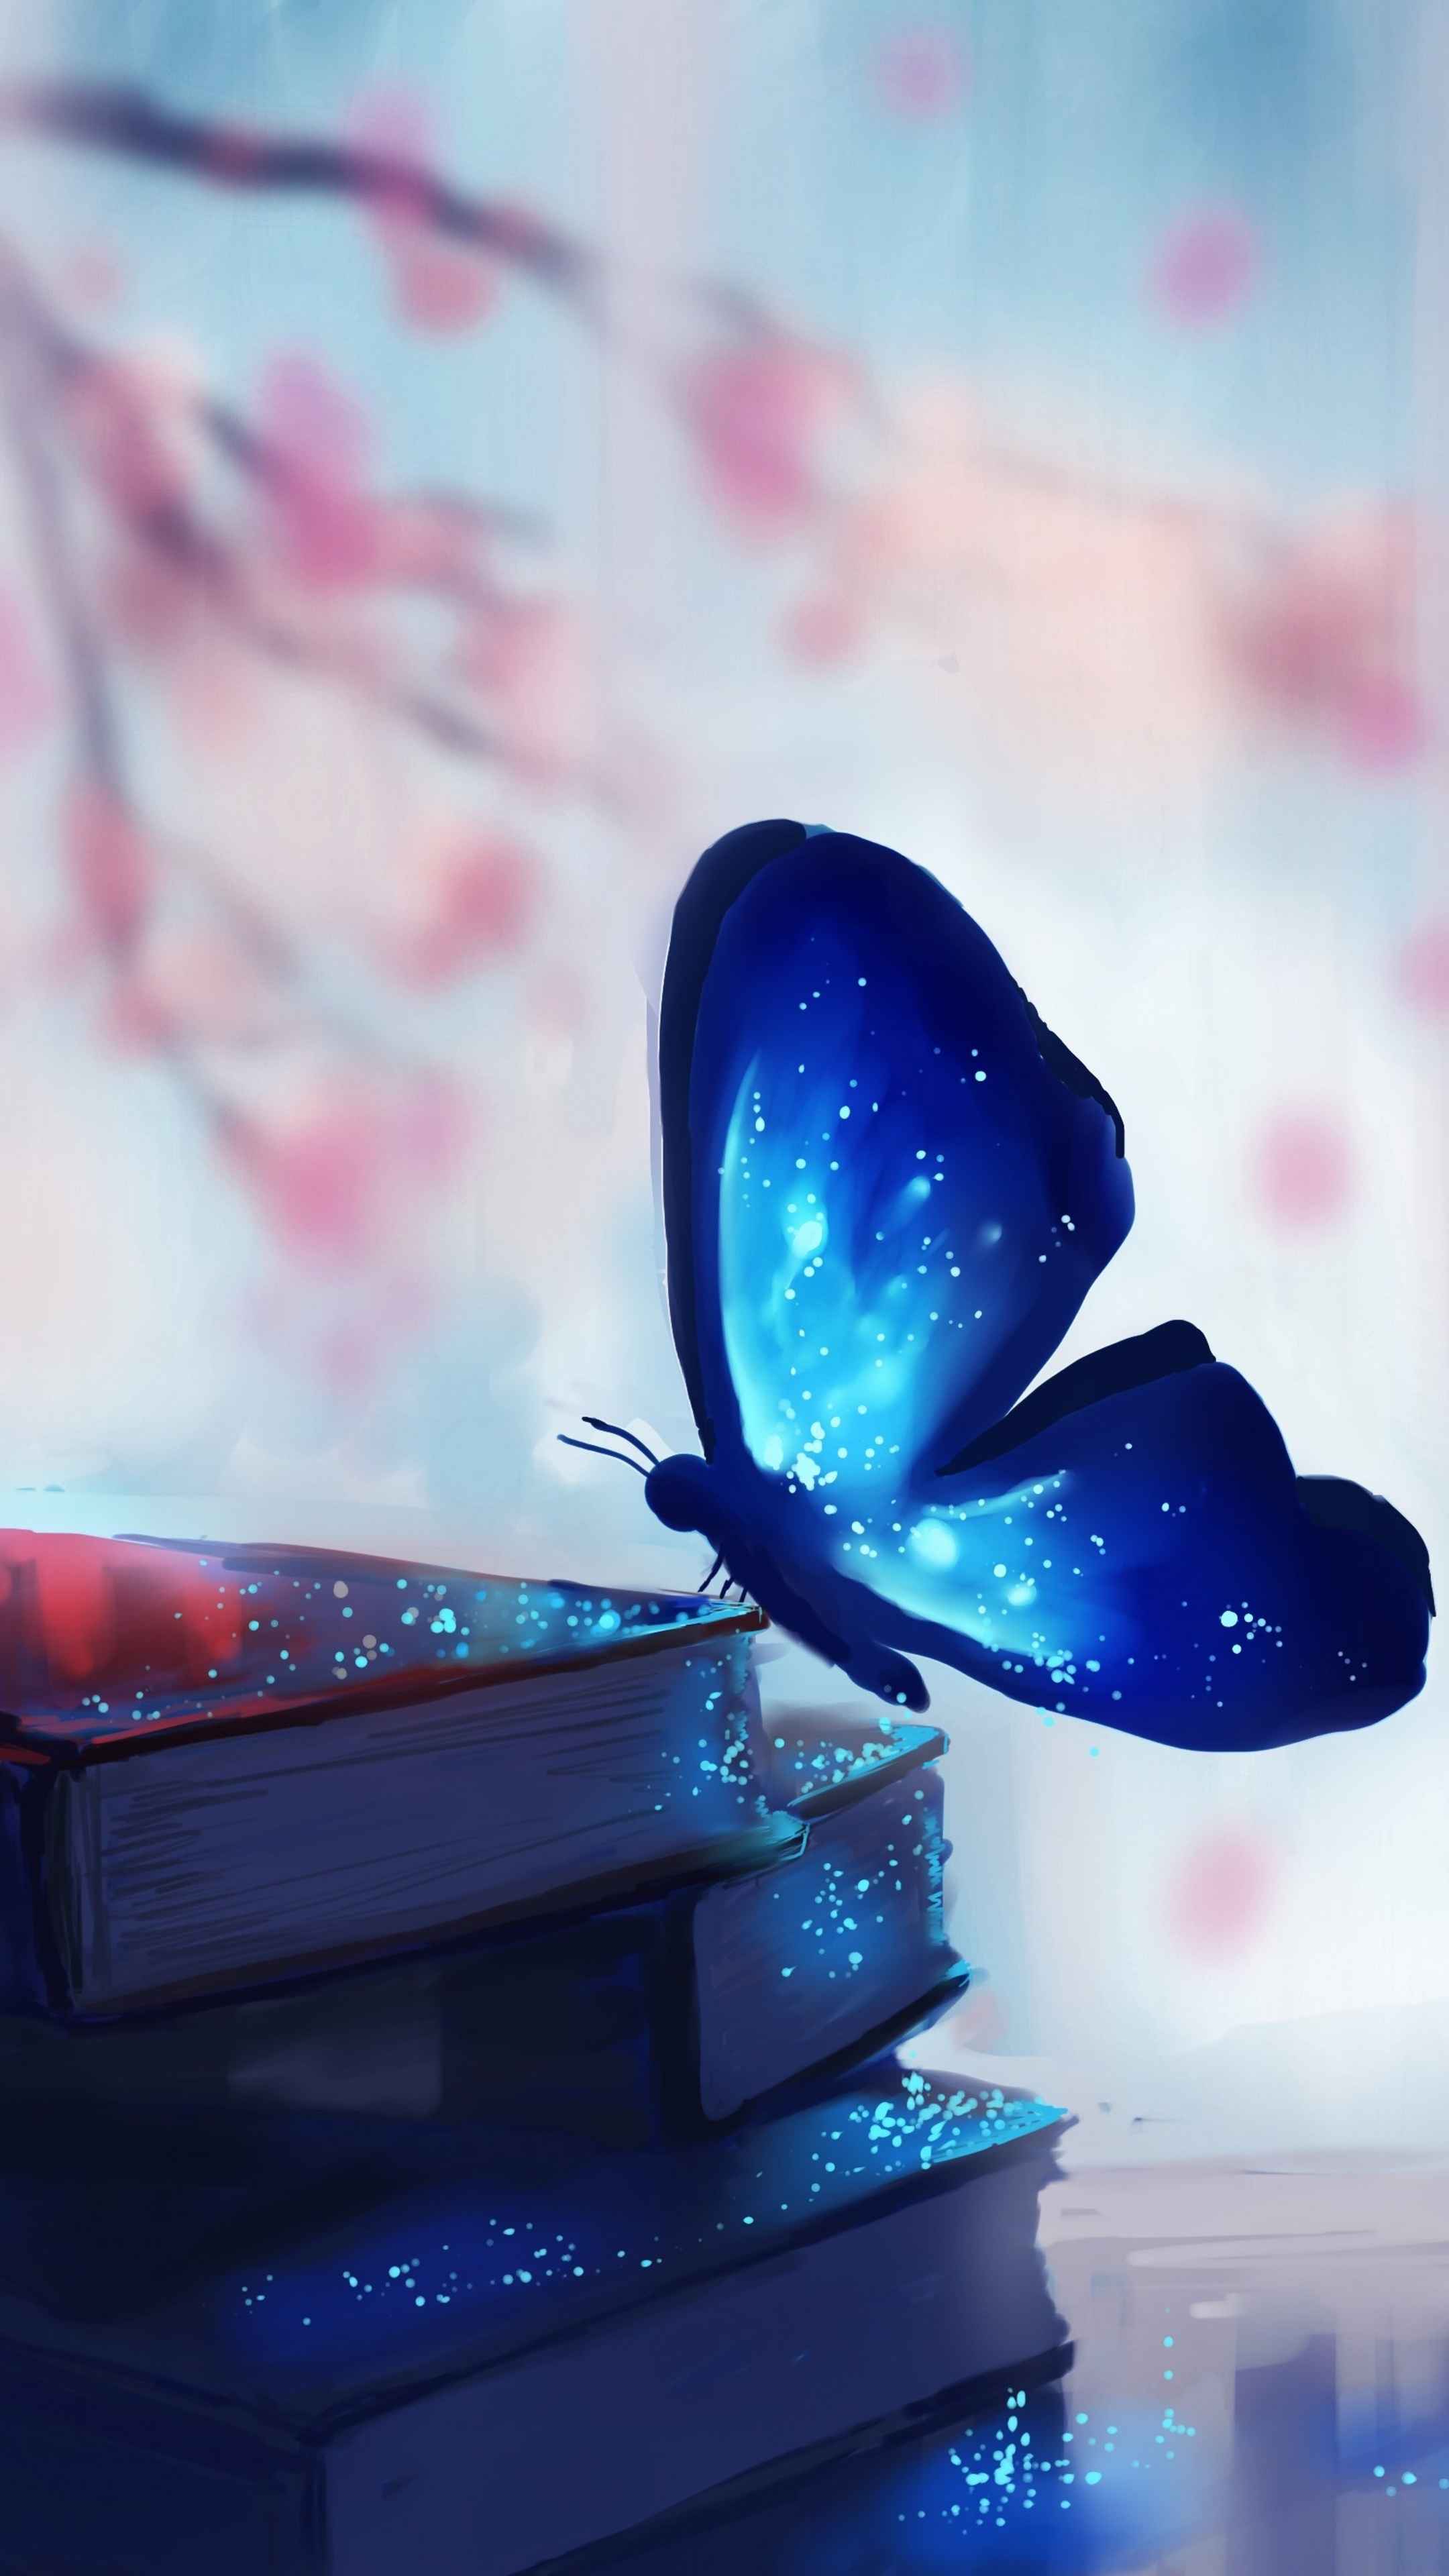 Butterfly colorful glowing fantasy artwork, Books, Sony Xperia, HD 4K wallpapers, 2160x3840 4K Phone